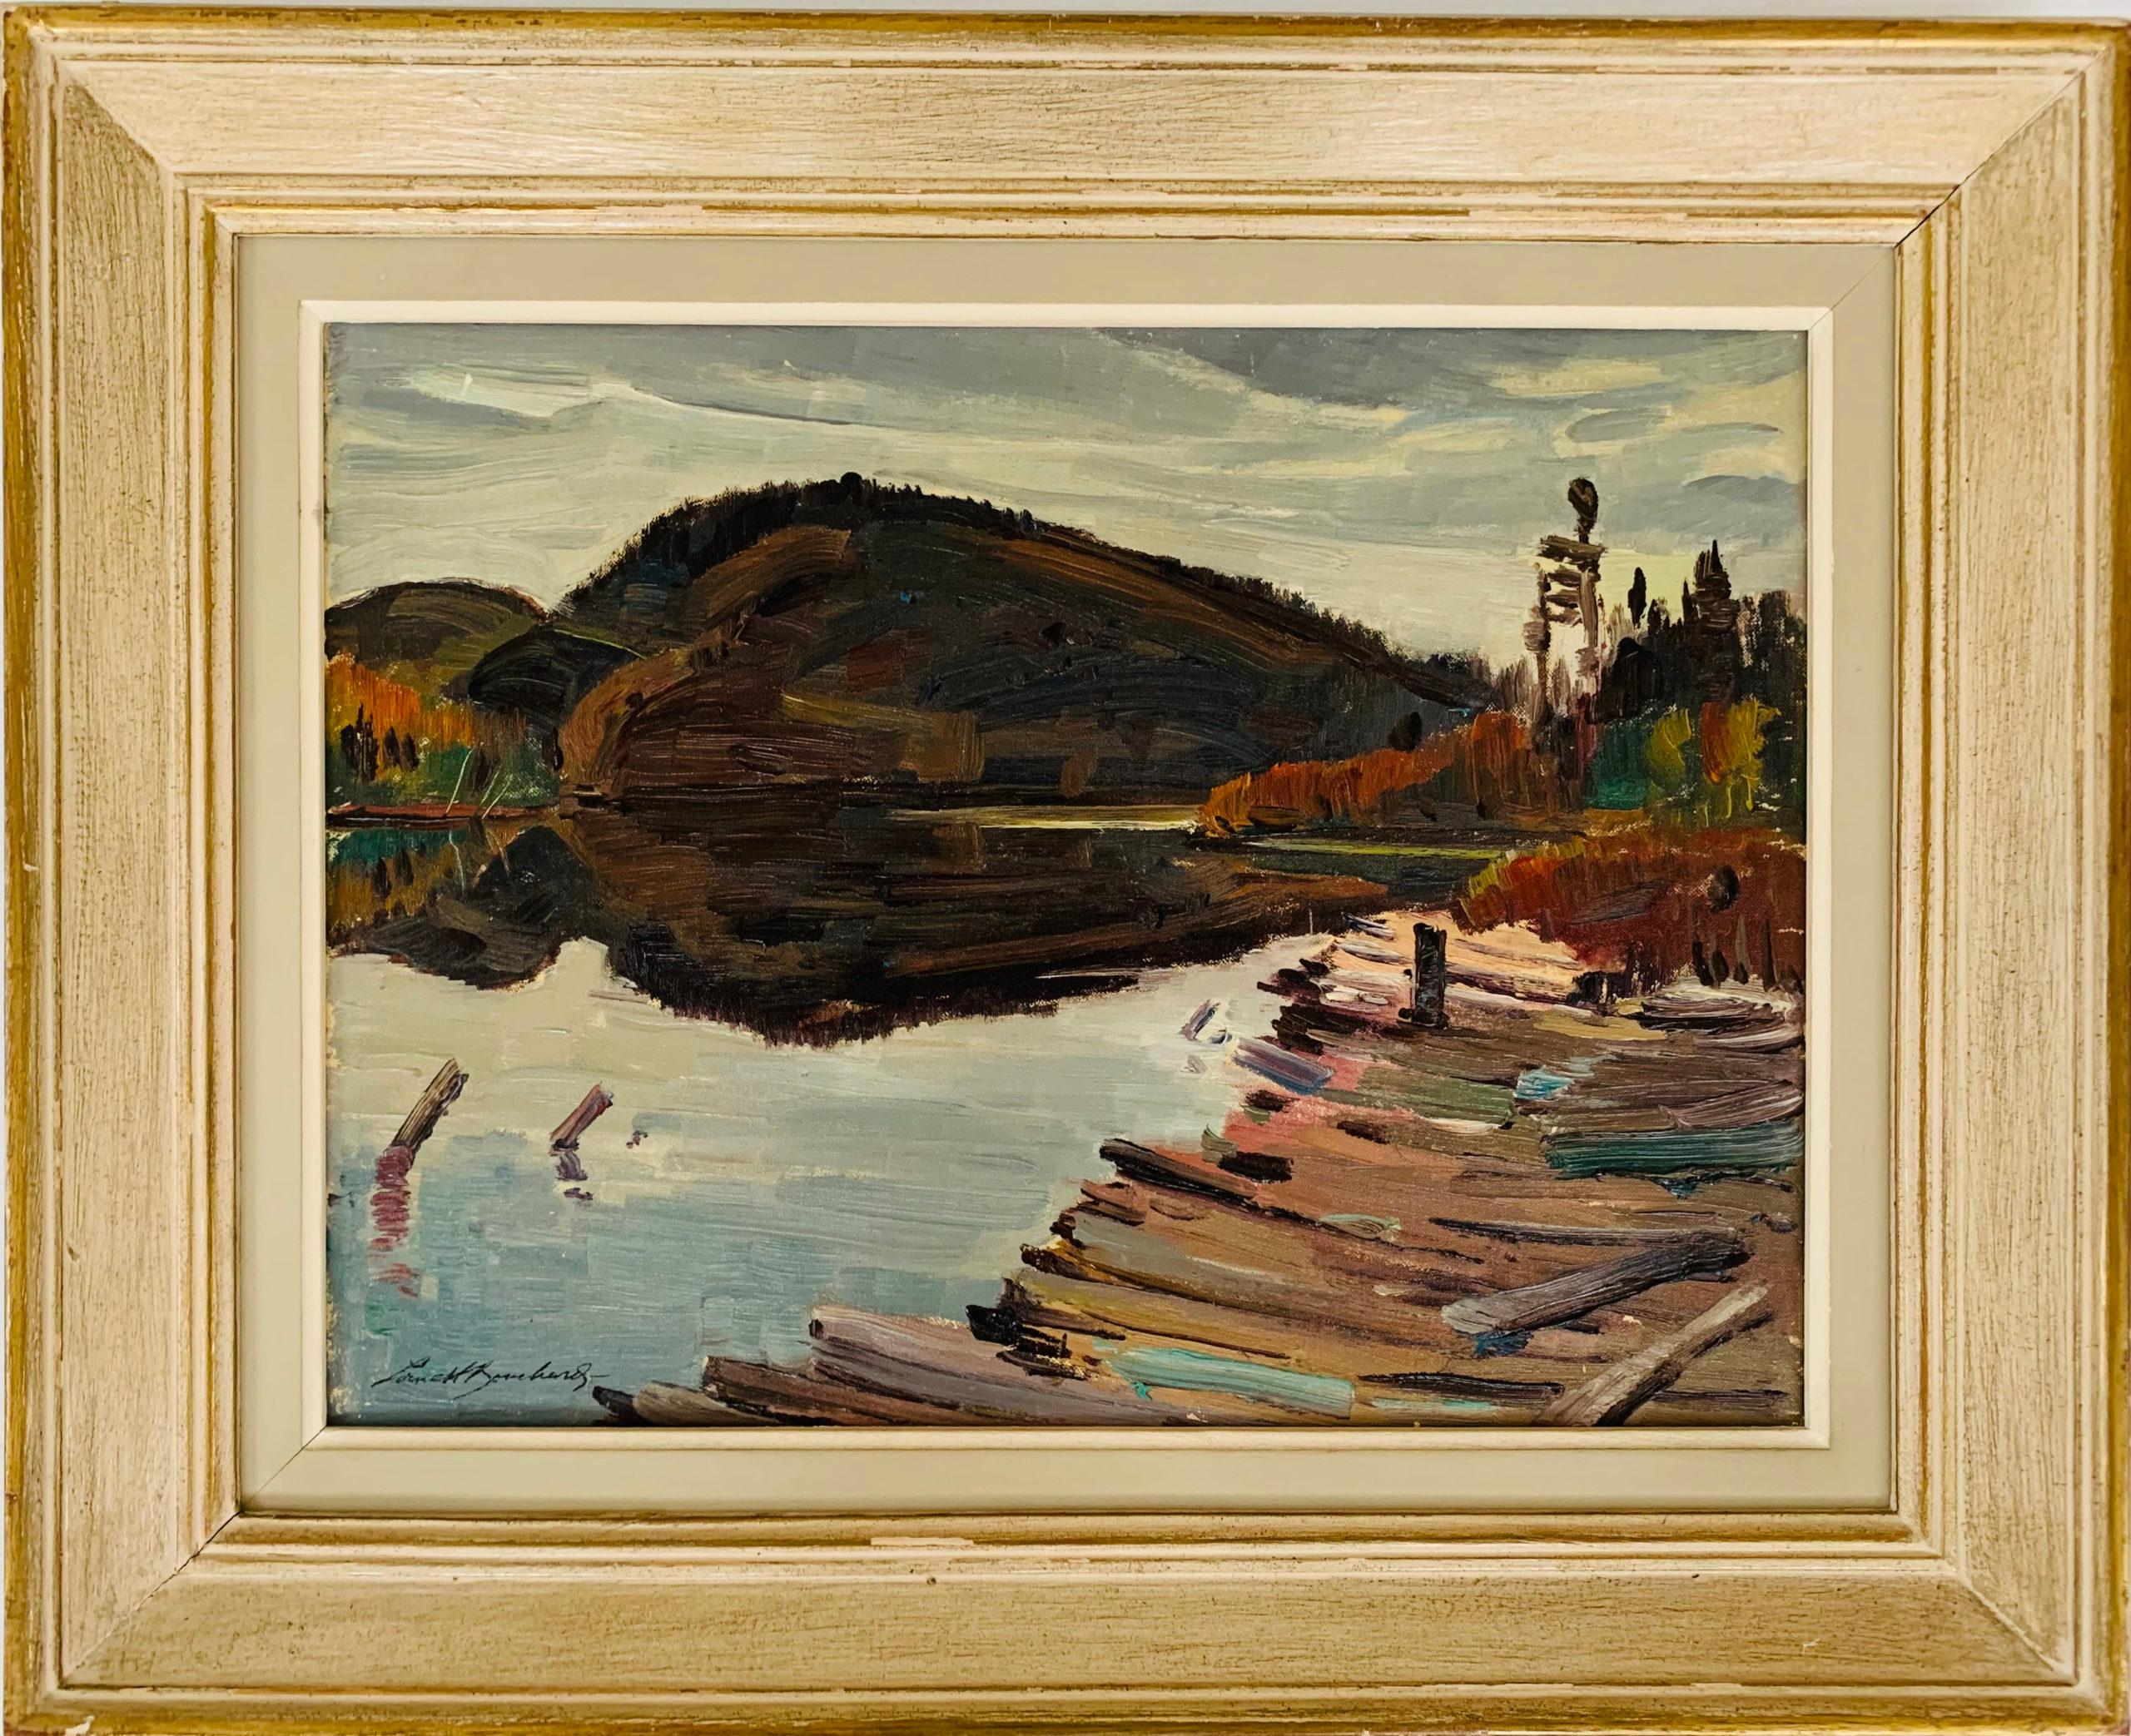 Lake in Saguenay, Quebec - Painting by Lorne Bouchard